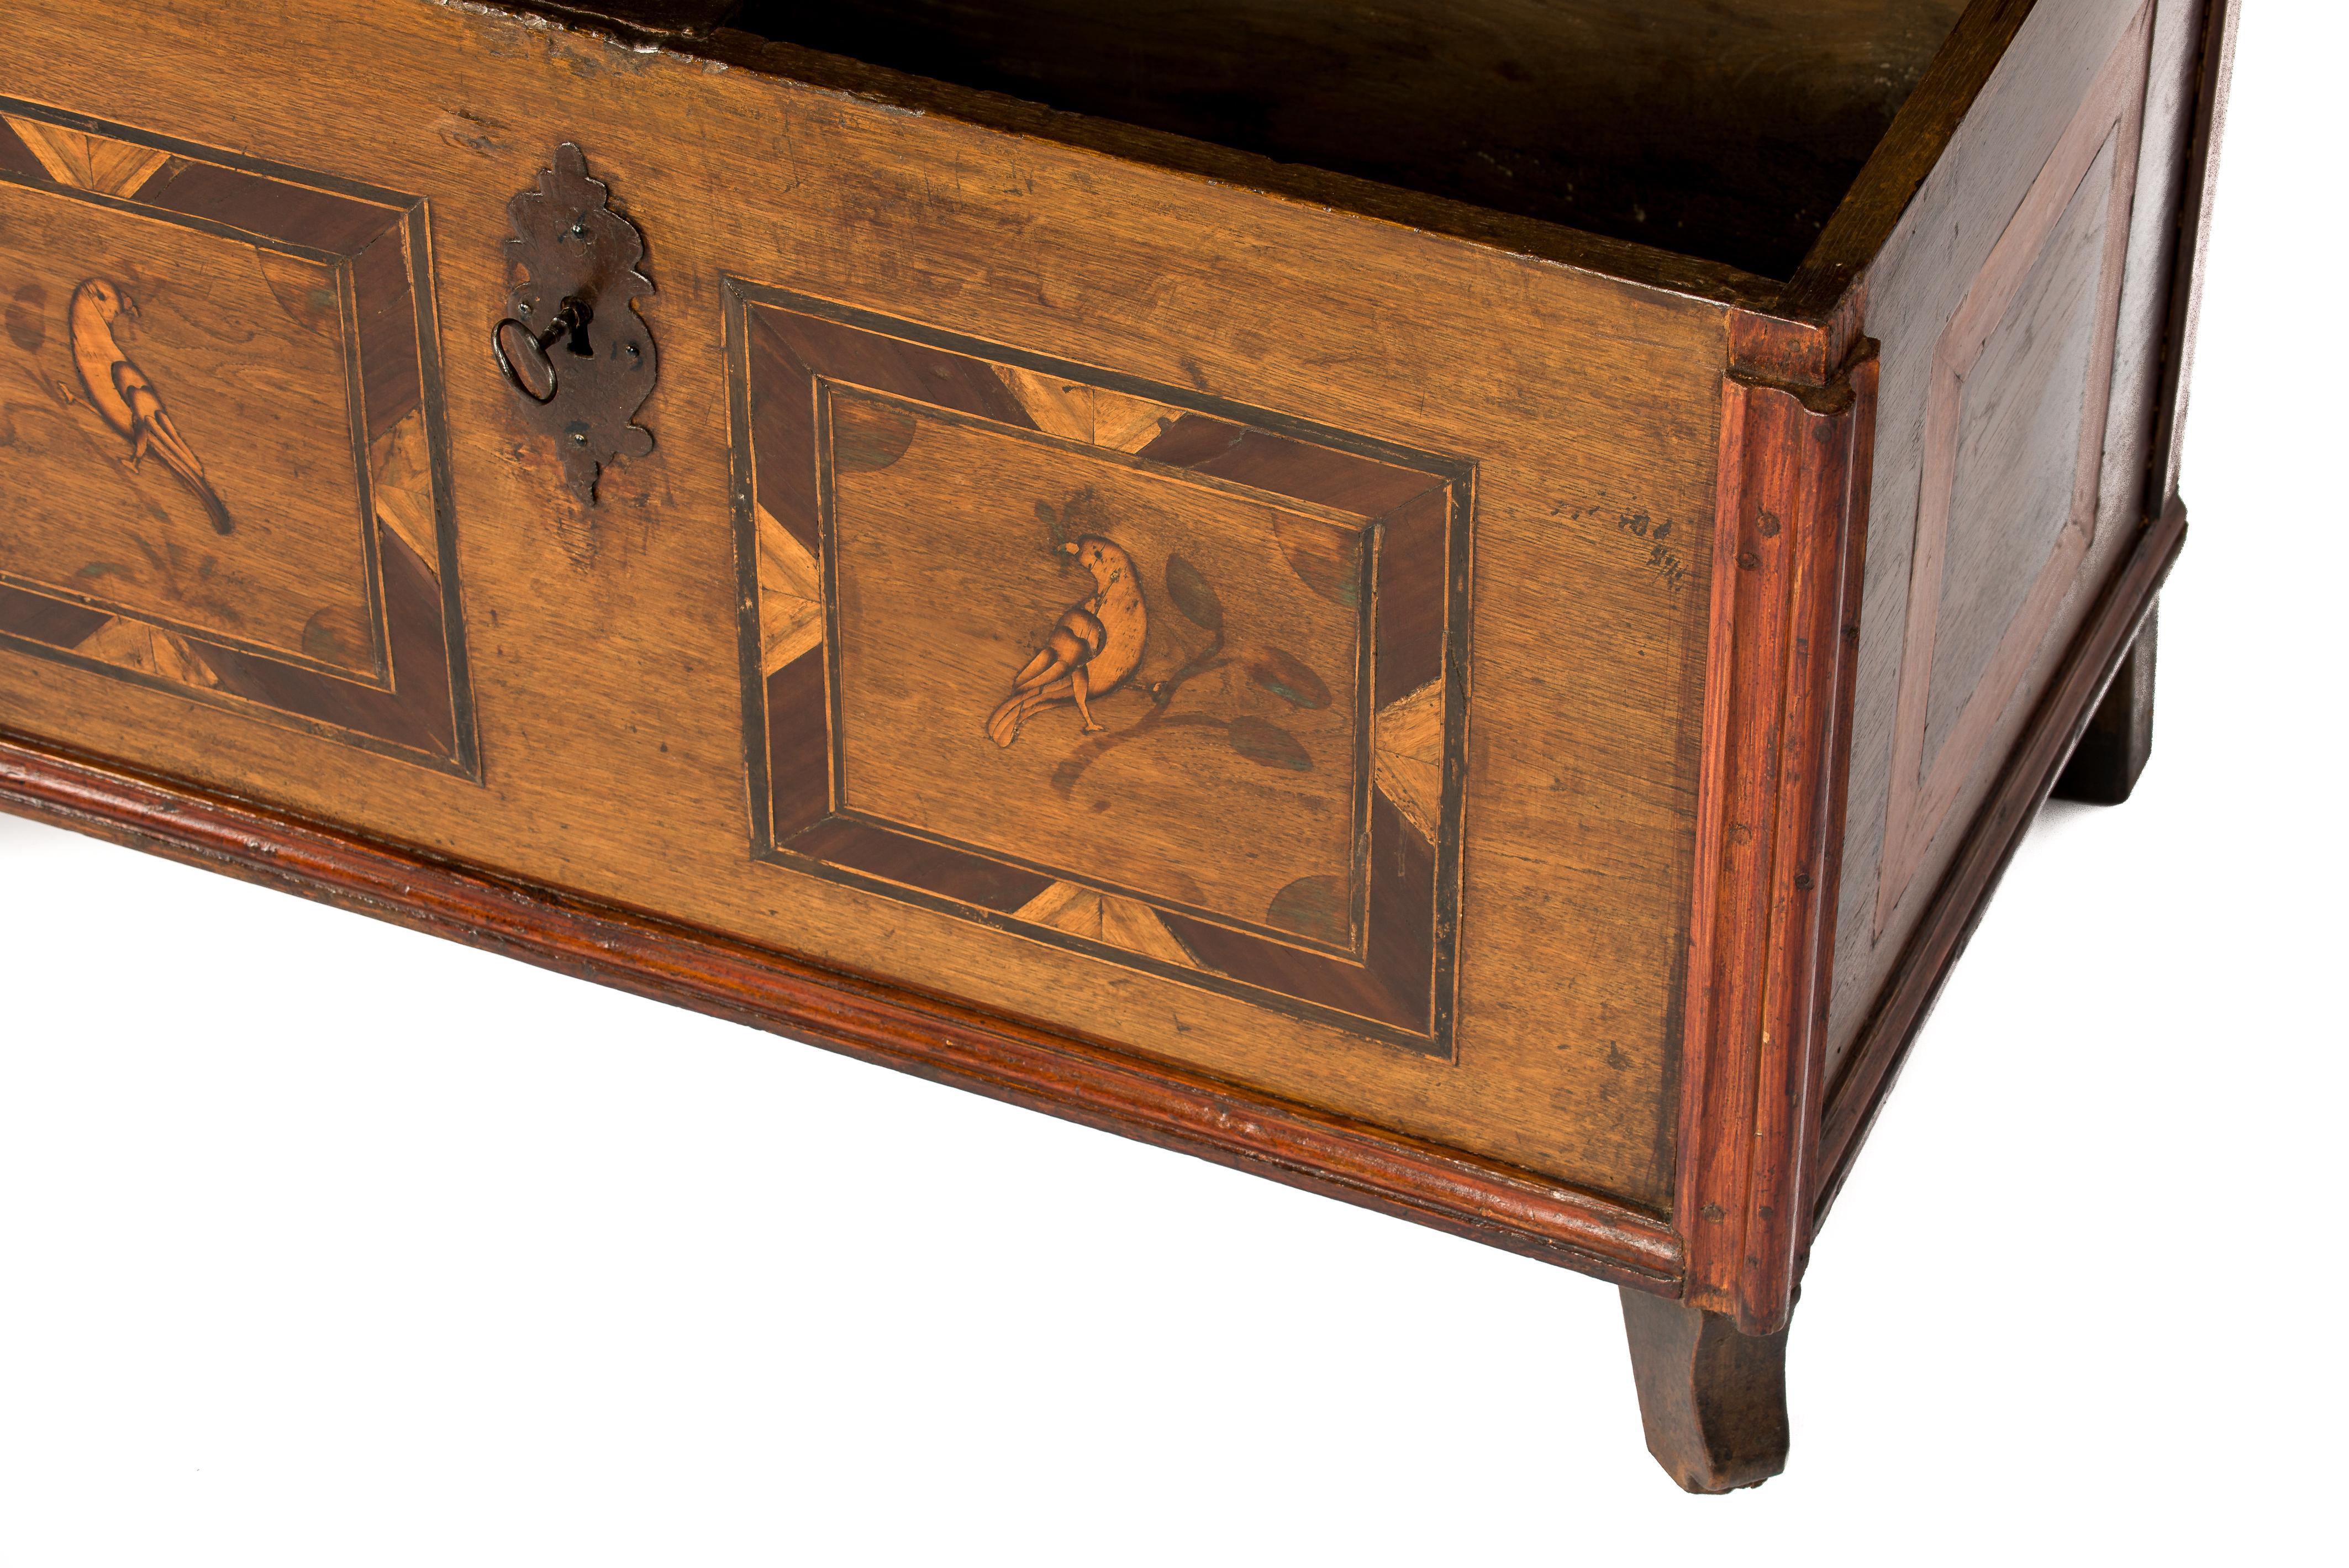 Antique Late 18th-Century German Oak and Fruitwood Marquetry Trunk or Chest For Sale 2